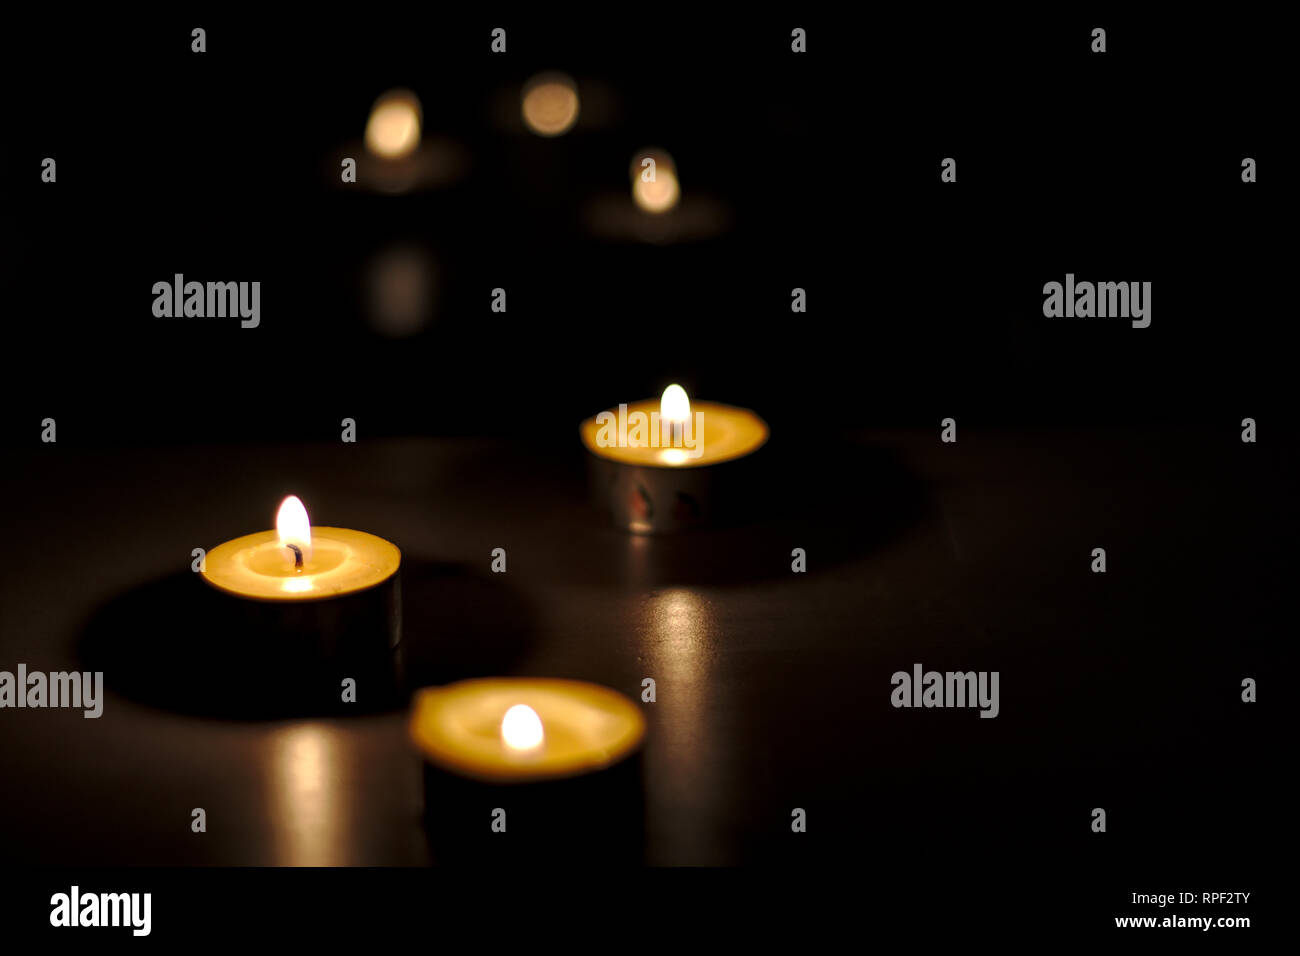 Playing with a minimum of light and bokeh effect, candles lights are reflecting shadows and toughts. Stock Photo